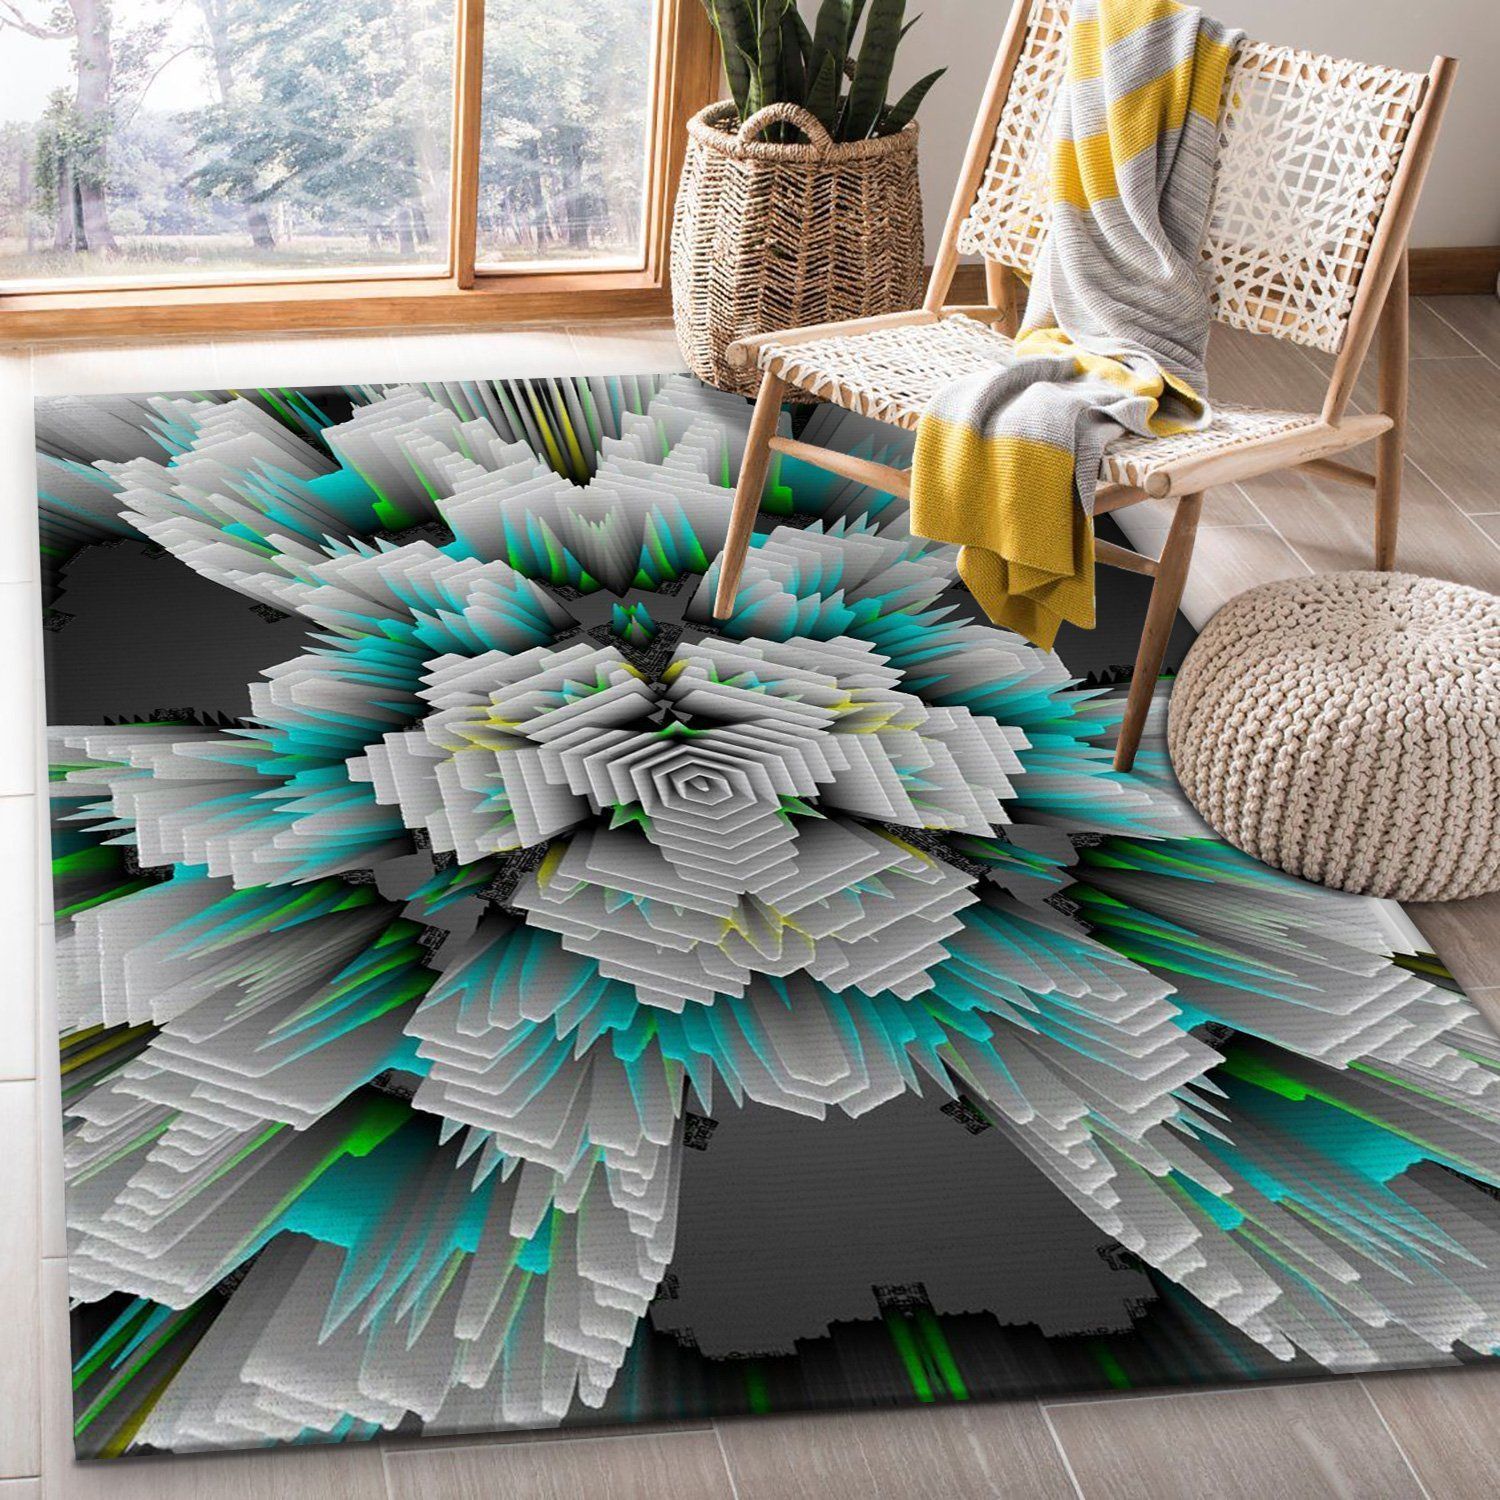 Abstract 3d Area Rug For Christmas, Kitchen Rug, Home Decor Floor Decor – Indoor Outdoor Rugs